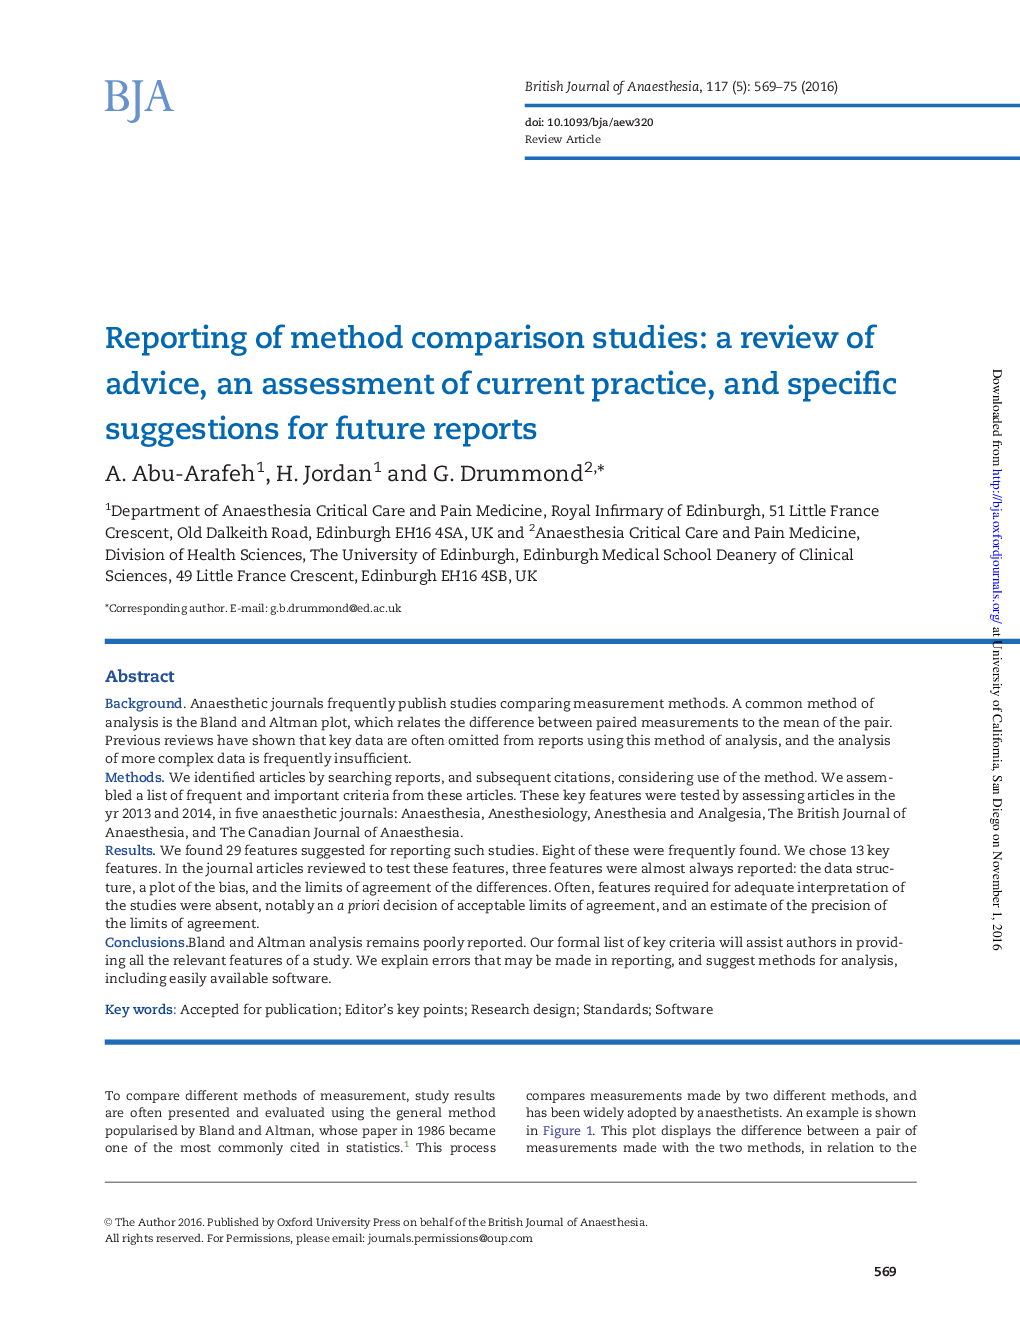 Reporting of method comparison studies: a review of advice, an assessment of current practice, and specific suggestions for future reports